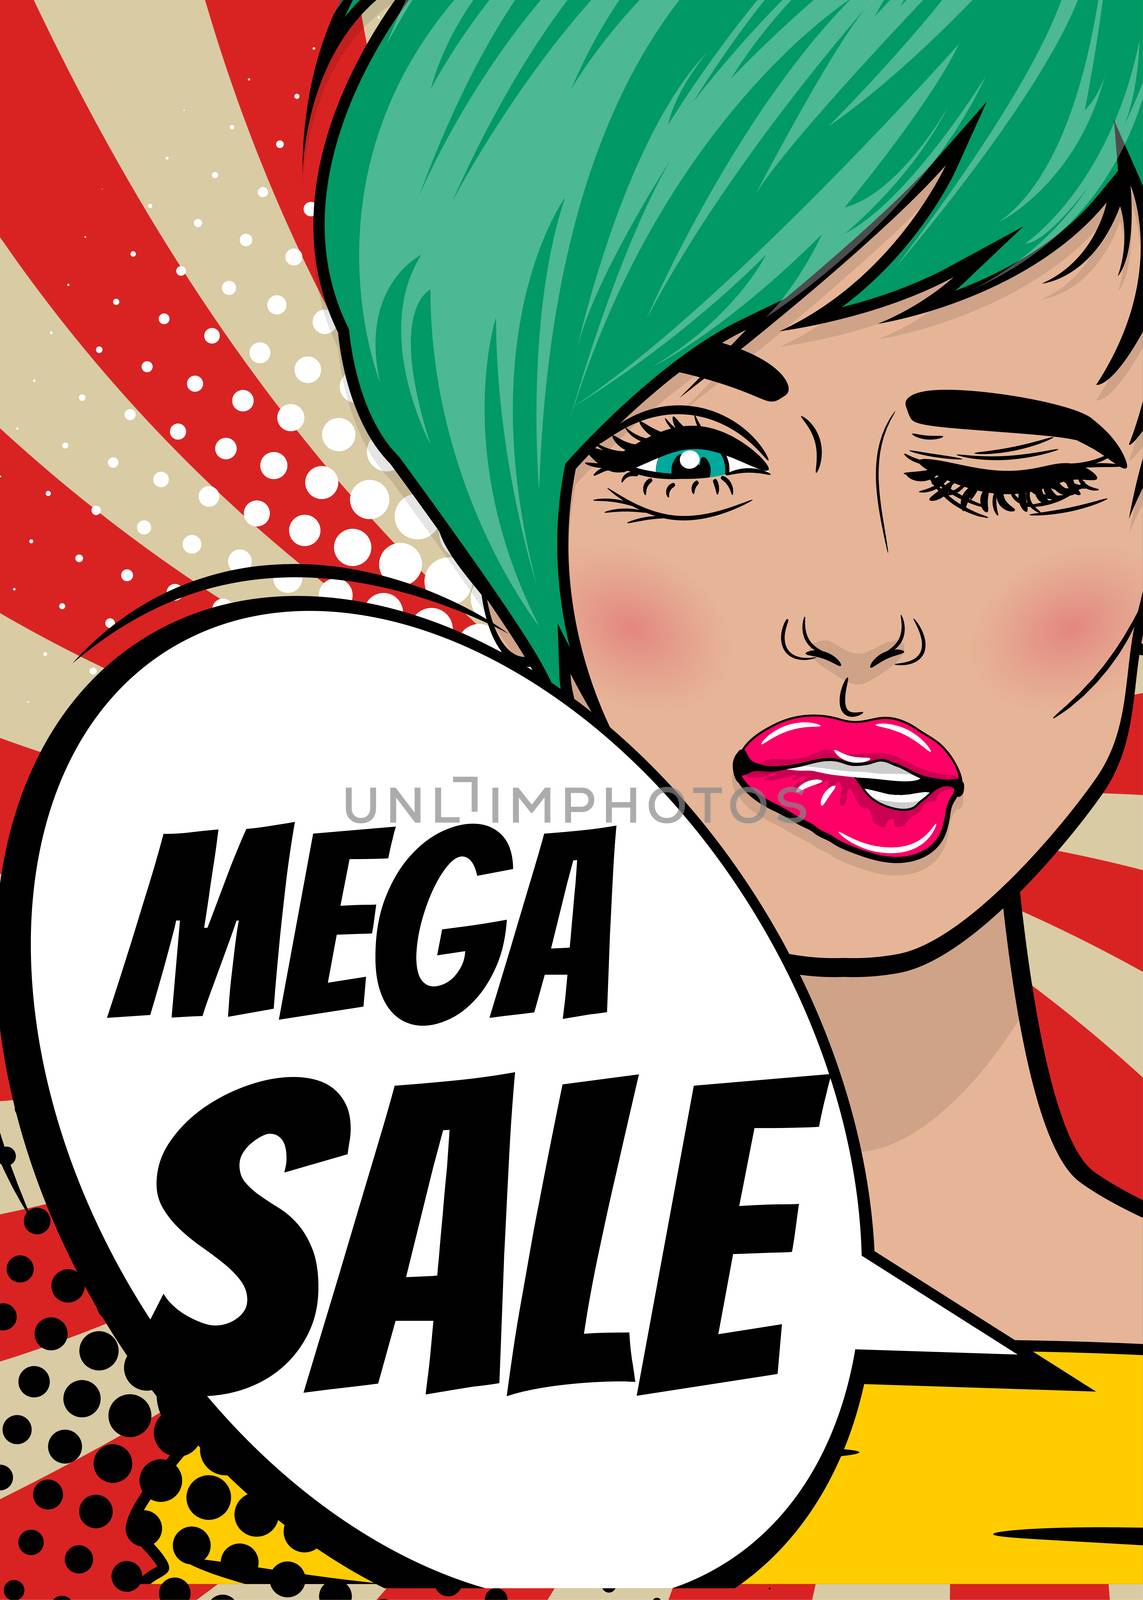 MEGA SALE. Pop art sexy woman advertise vintage poster. Comic book text balloon speech bubble. Discount banner vector retro illustration. Girl comic wow face surprised marketing special offer.